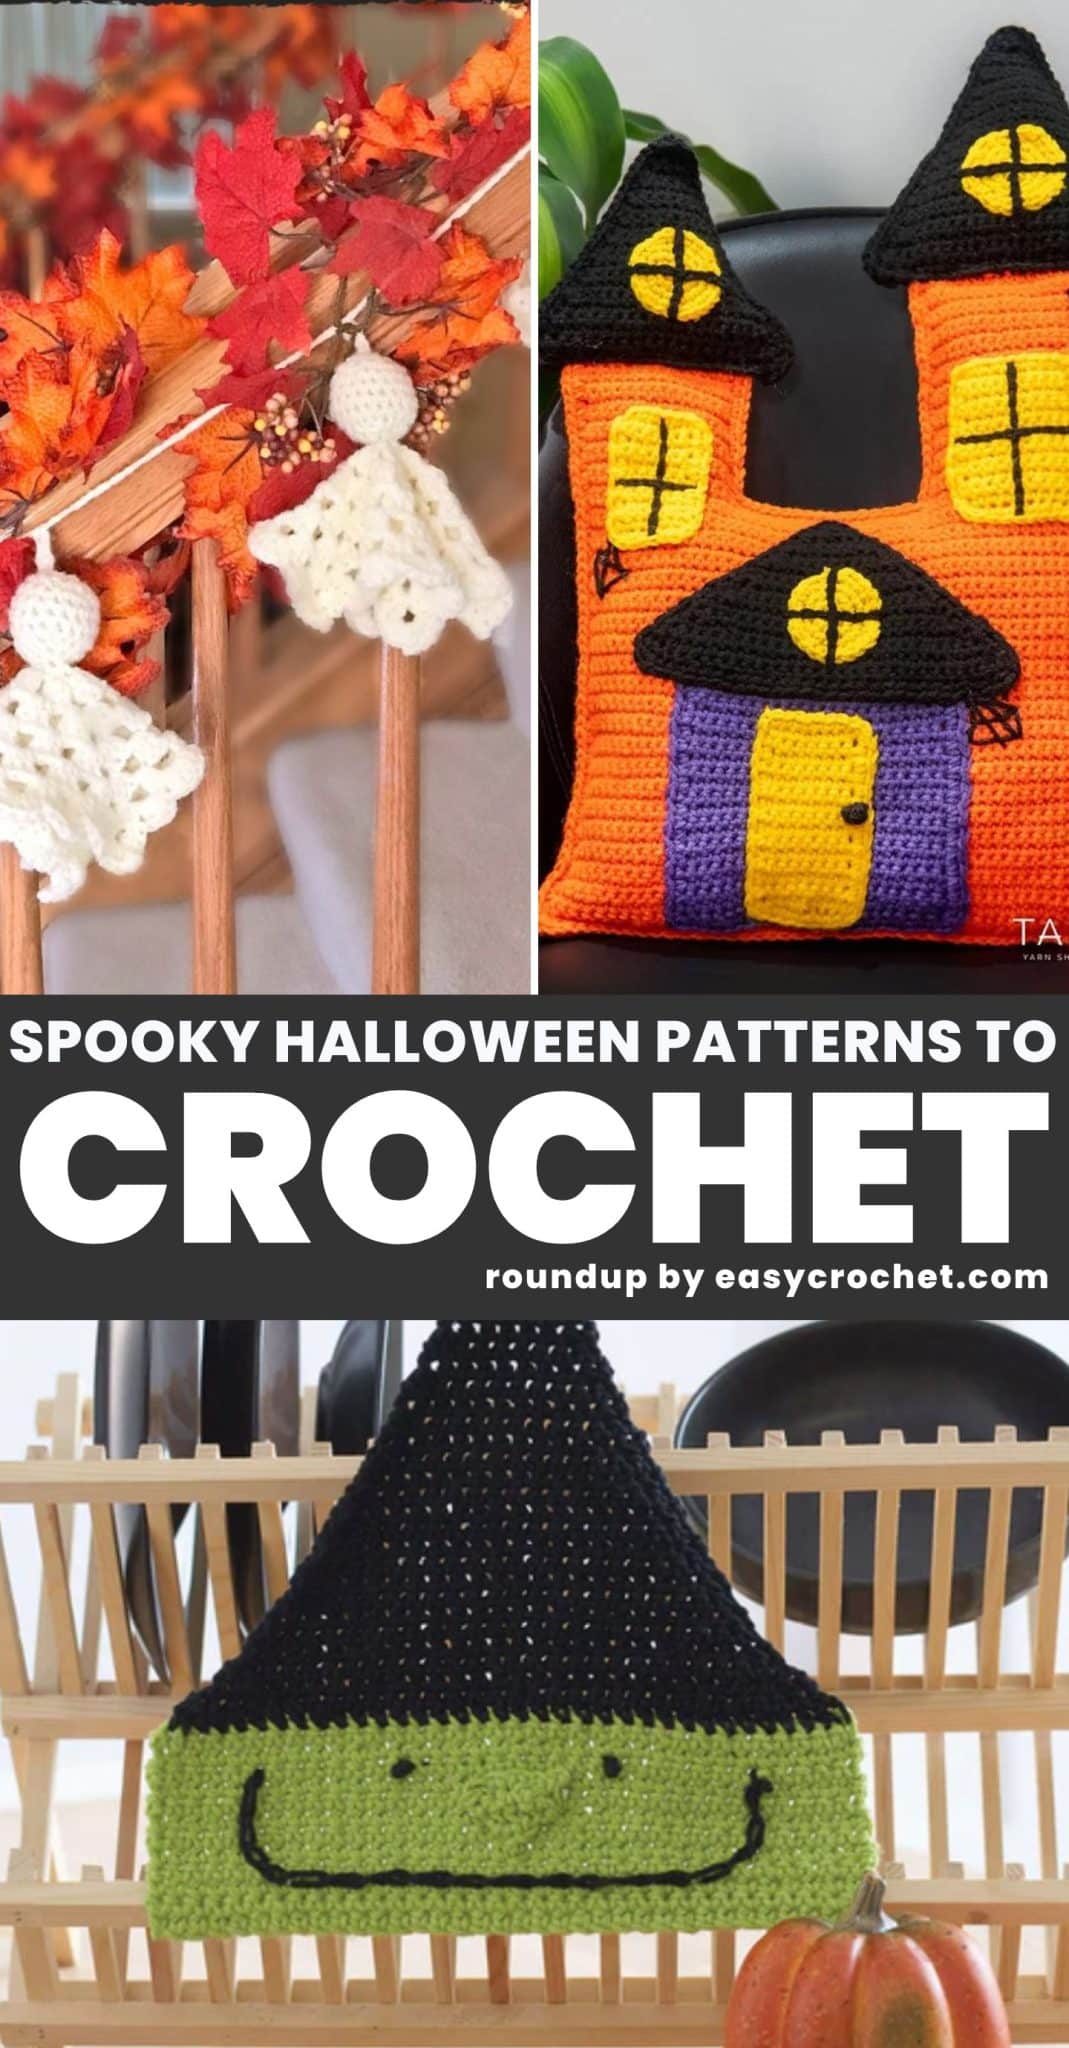 spooky Halloween crochet patterns and projects